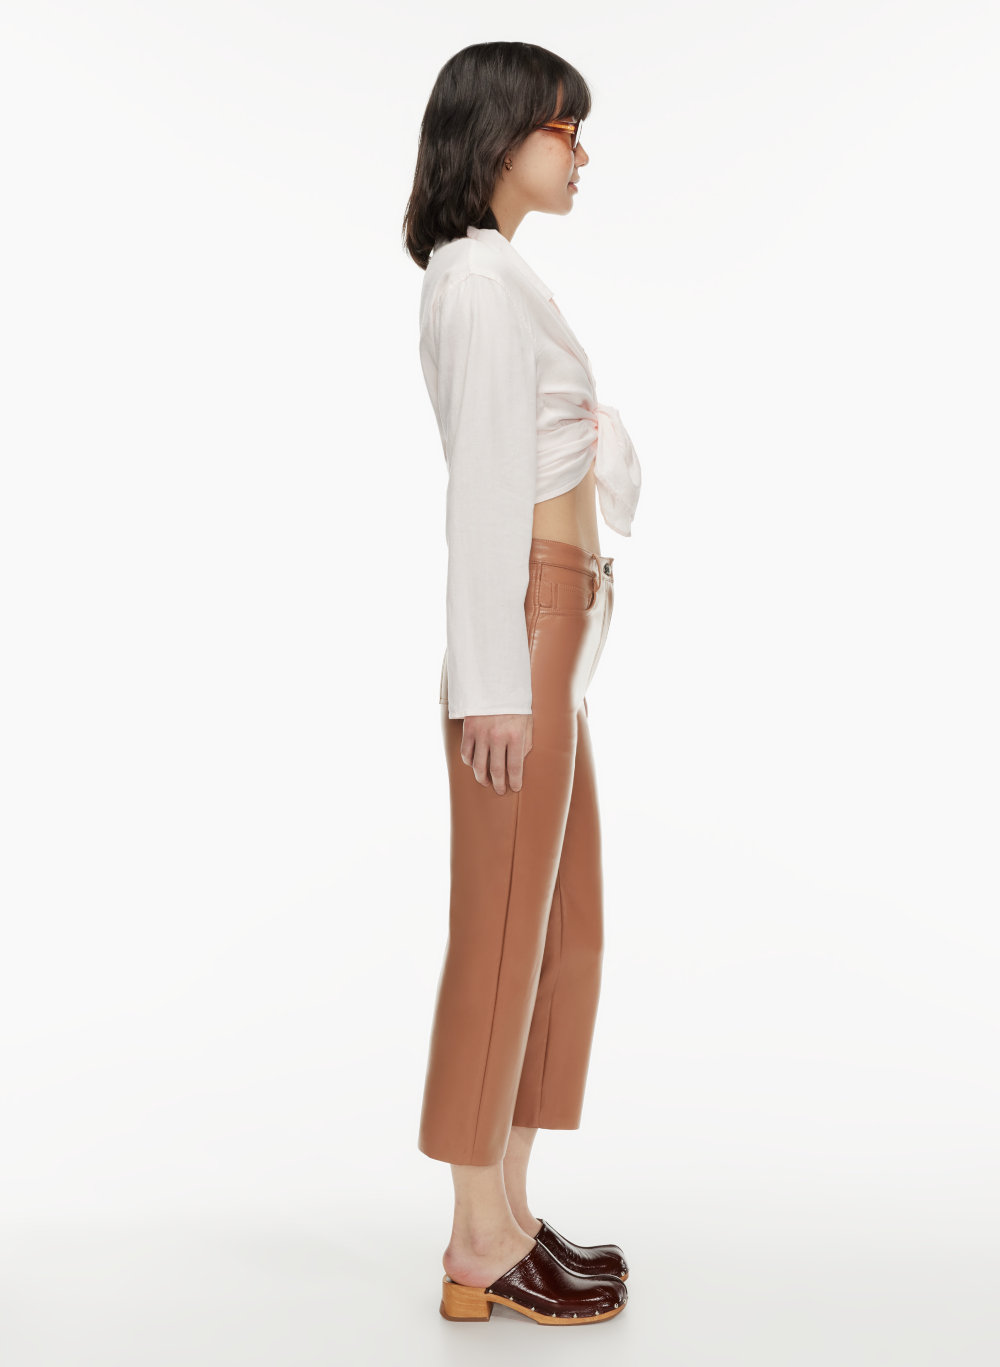 Wilfred MELINA CROPPED PANT | Aritzia INTL